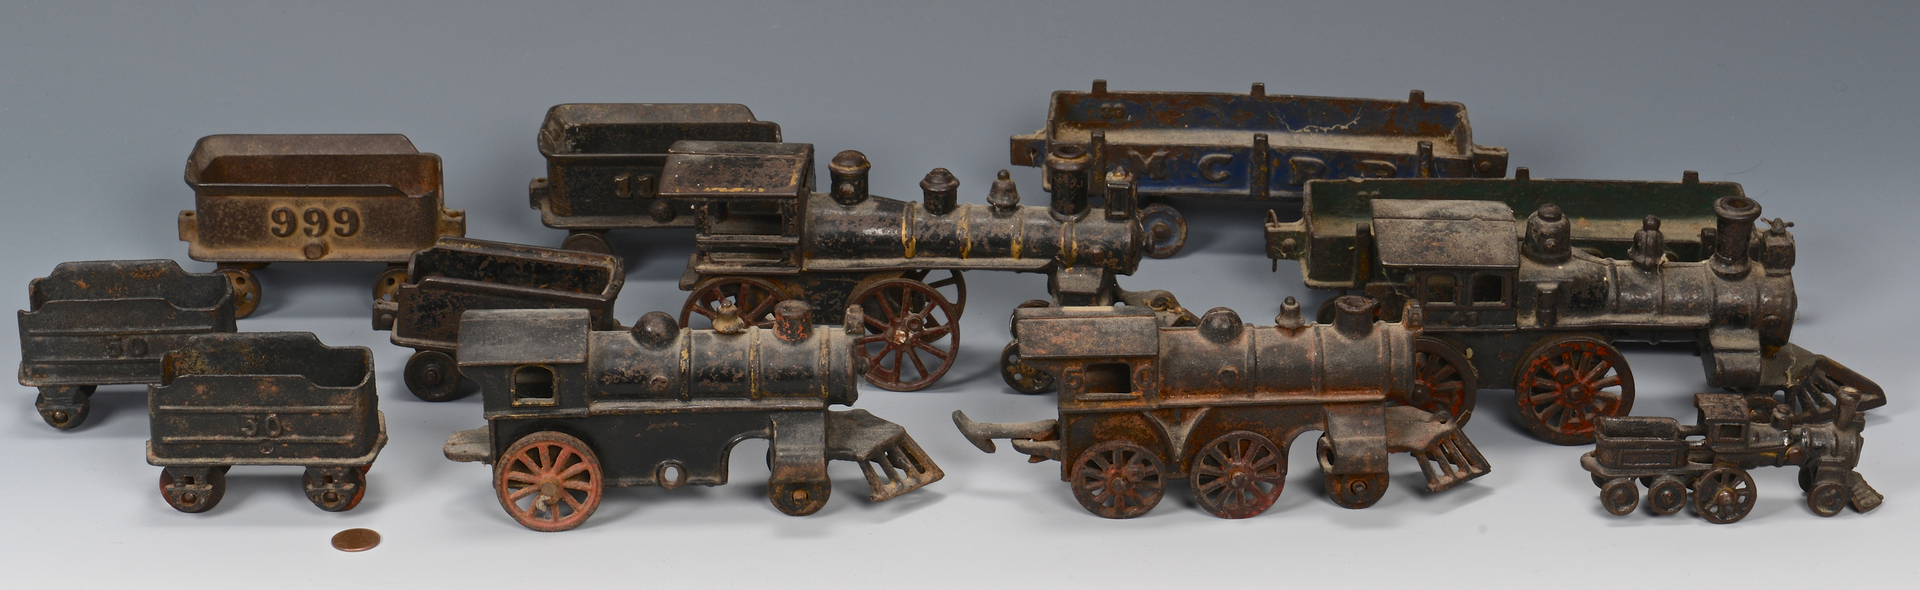 Lot 472: Group of 12 Cast Iron Trains, Cars